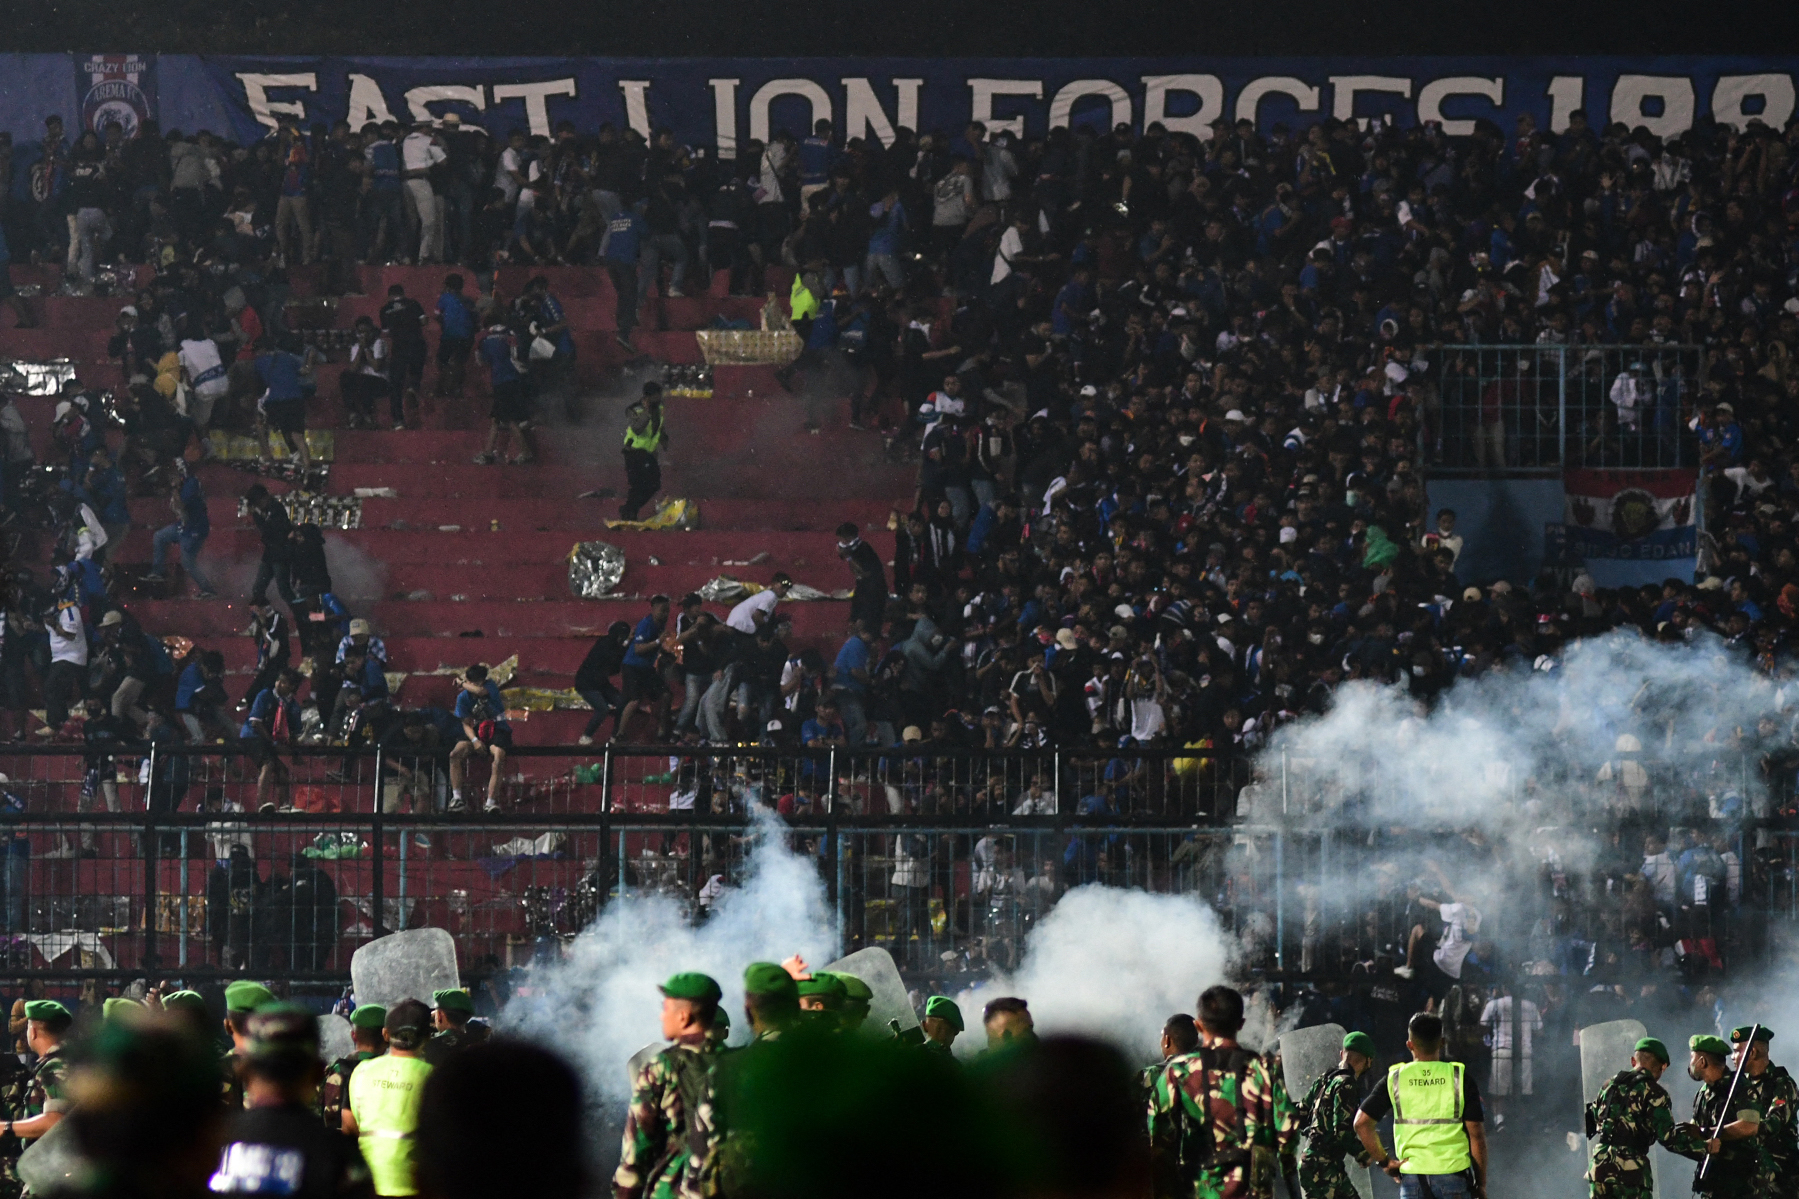 Indonesia: Investigate police tear gas use after at least 130 people die in football match stampede